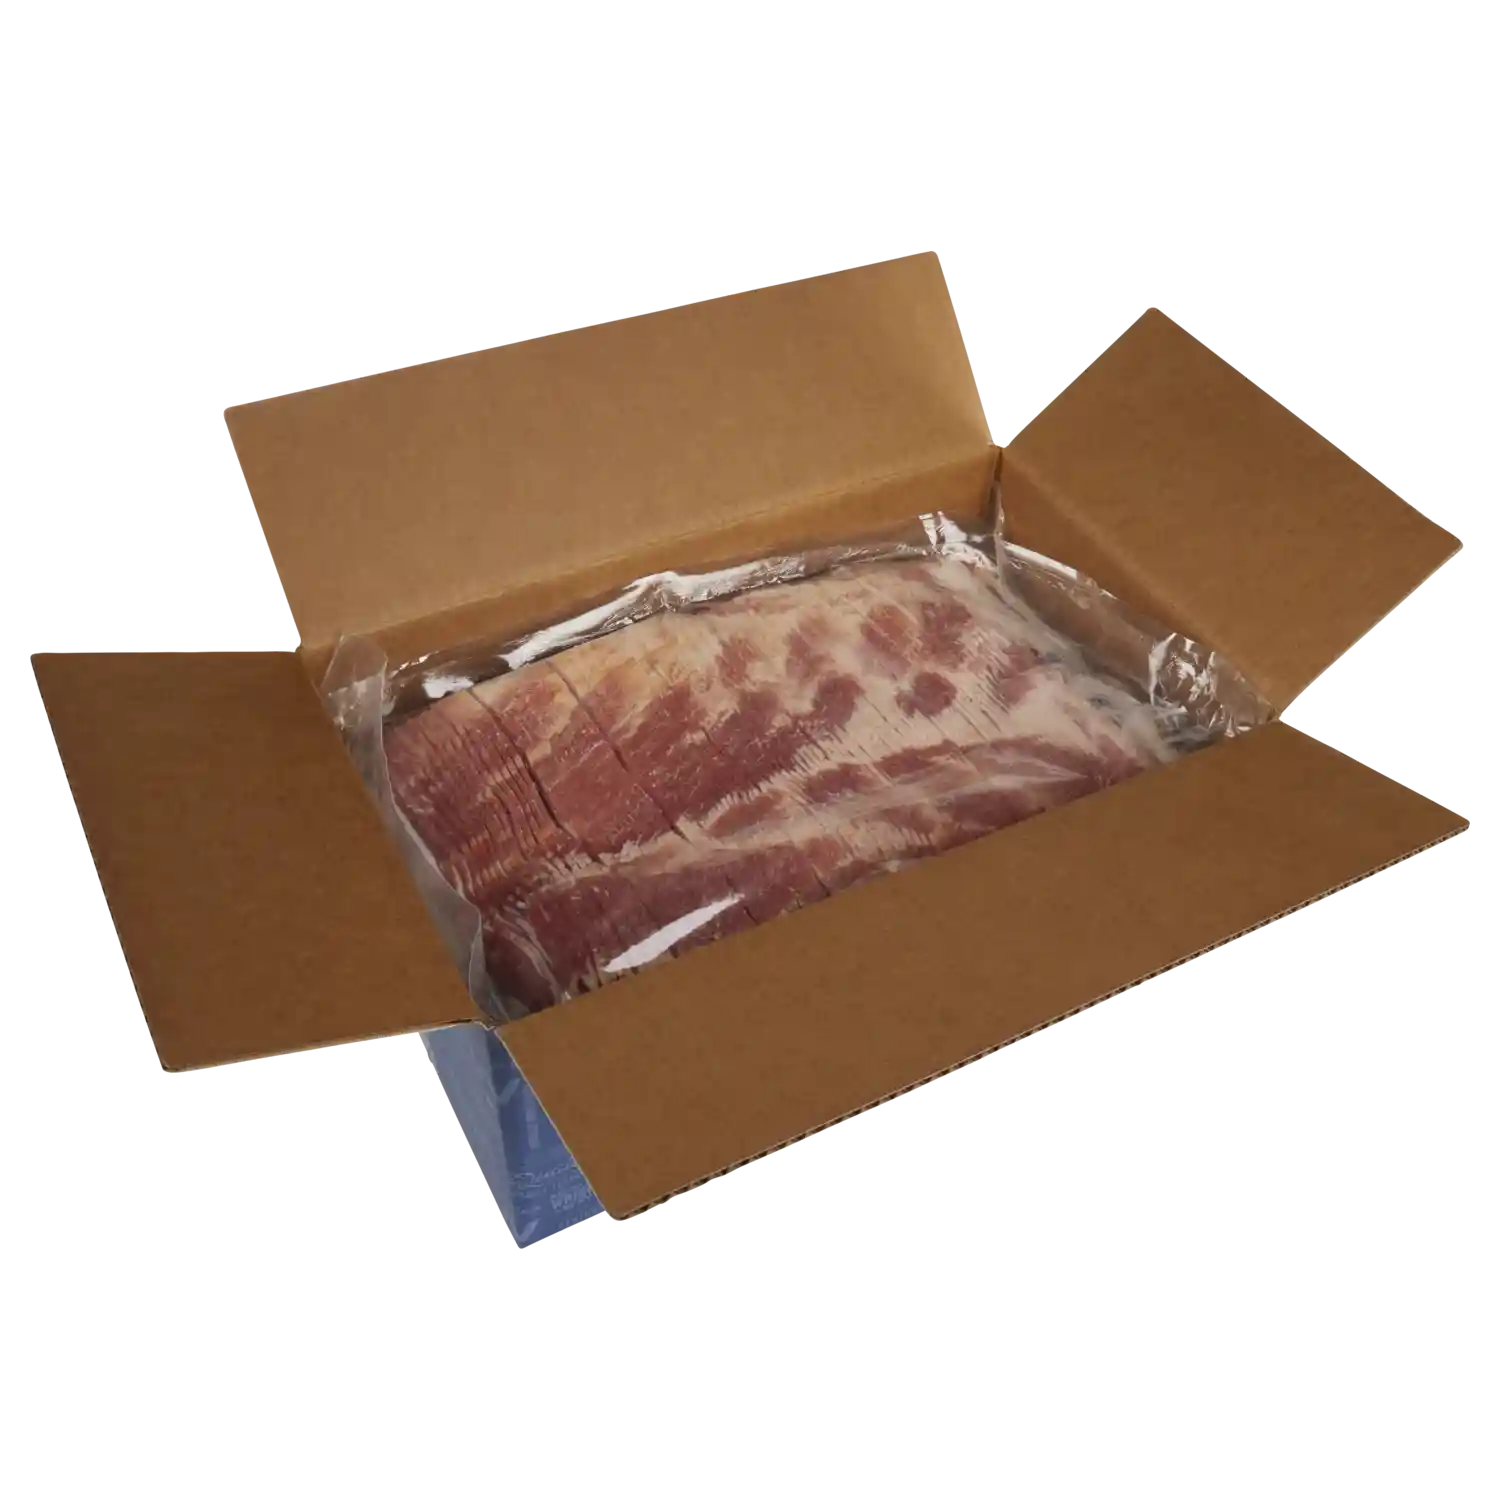 Wright® Brand Naturally Hickory Smoked Thin Sliced Bacon, Bulk, 30 Lbs, 18-22 Slices per Pound, Gas Flushed_image_41